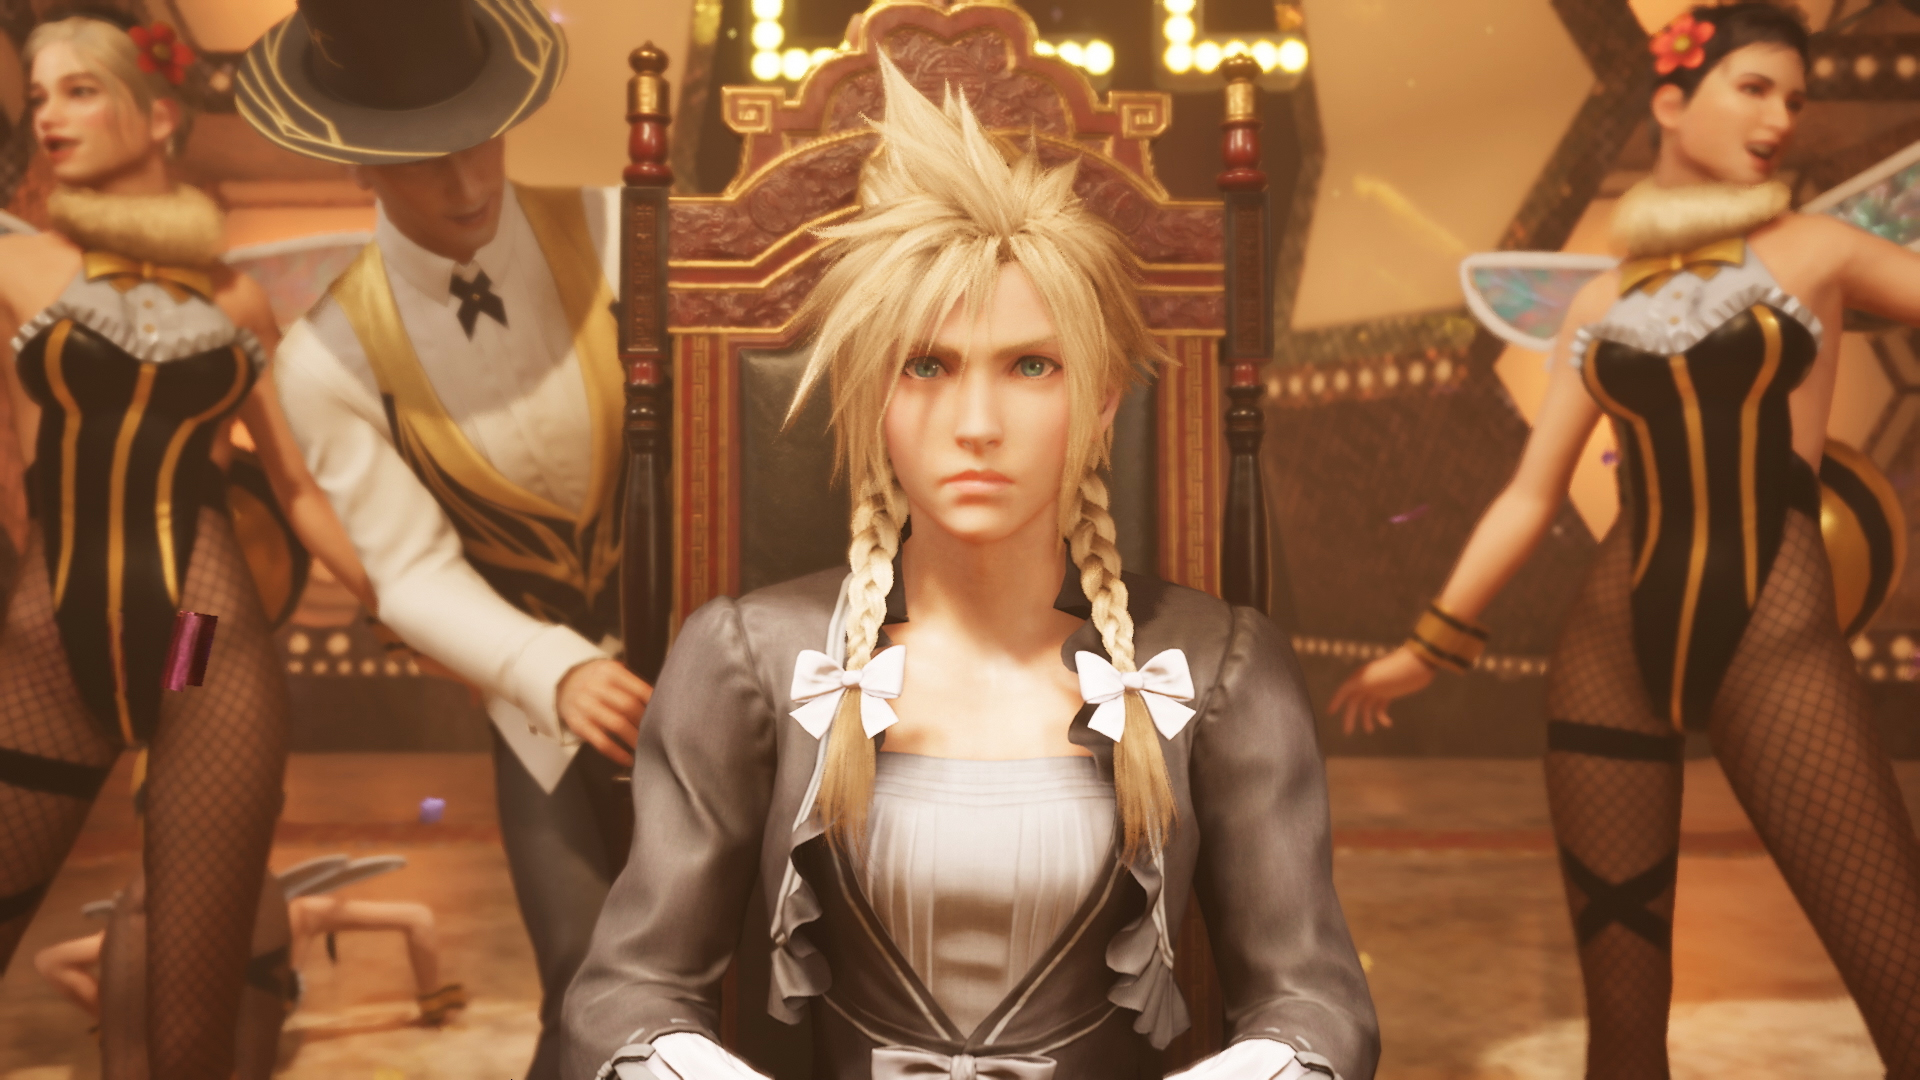 Cloud sits with his hair braided, and wears a dress at the Honeybee Inn